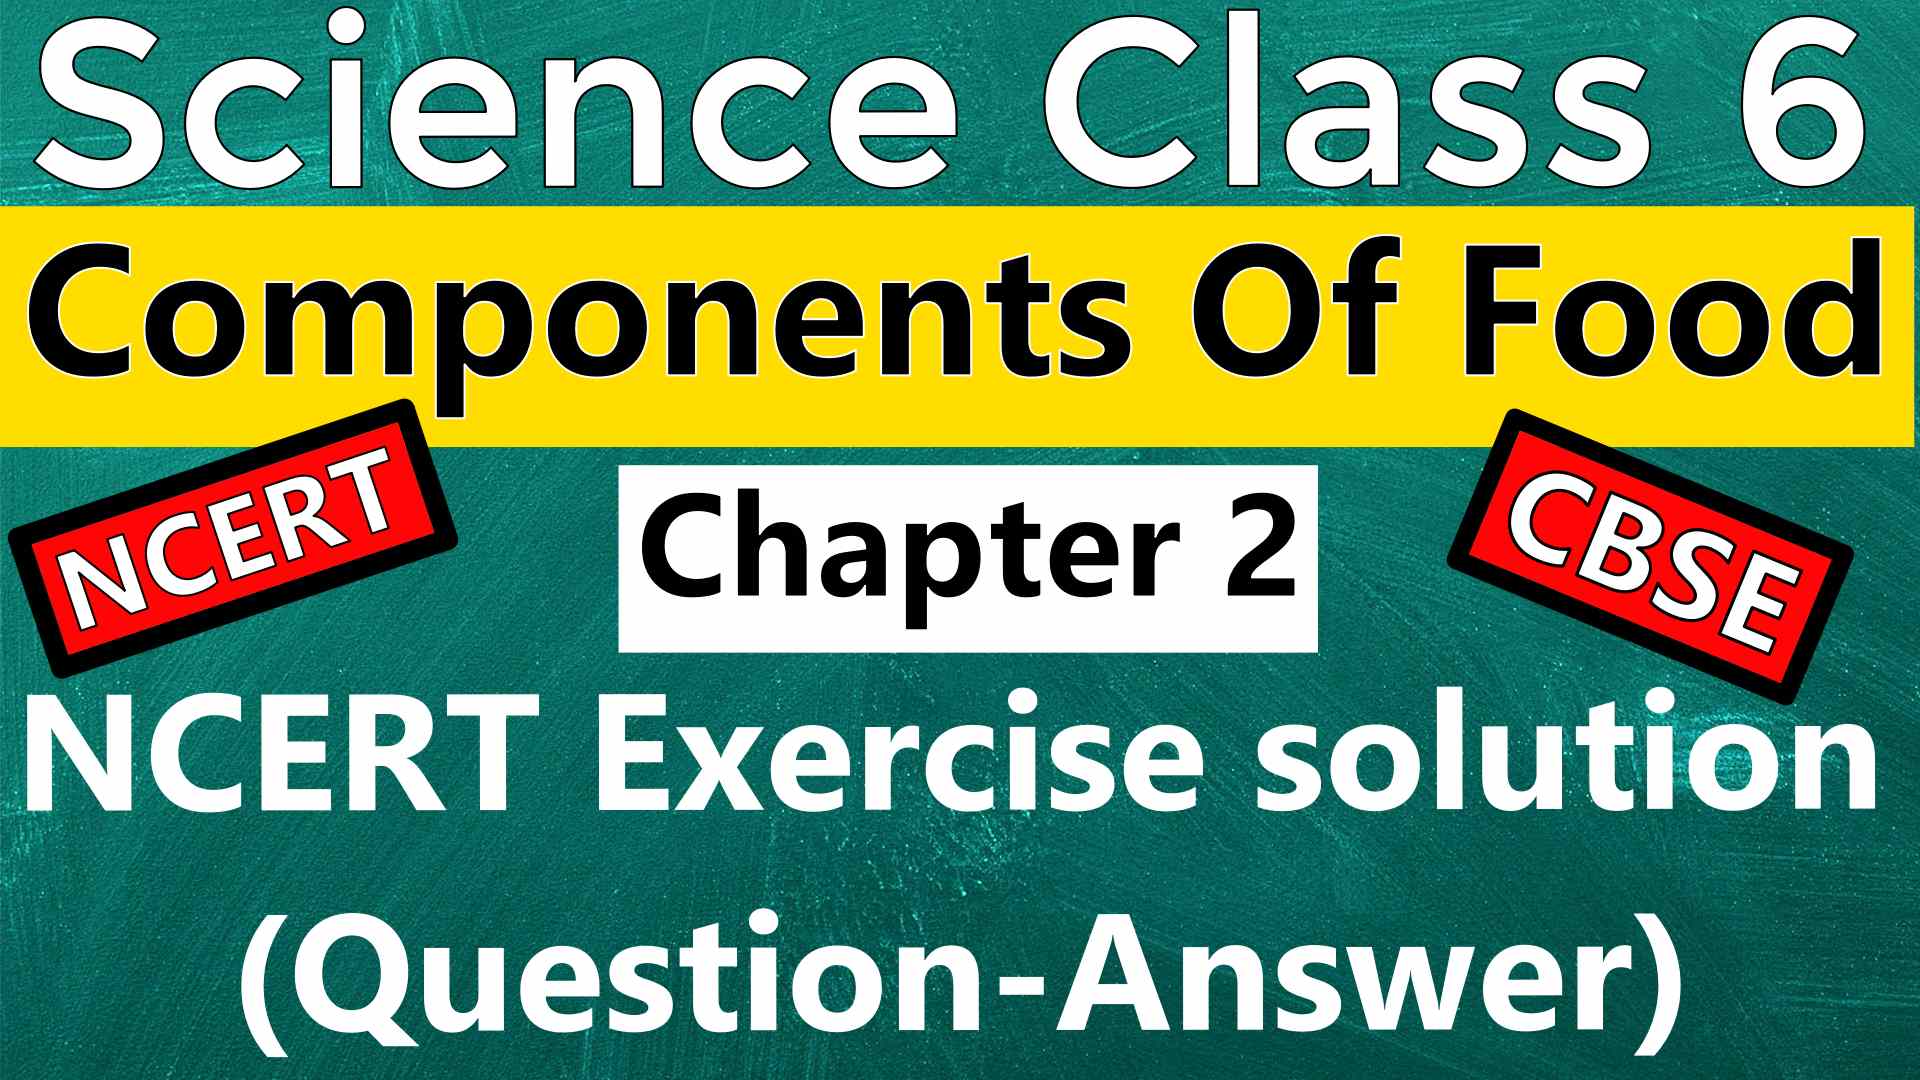 Science Class 6 - Chapter 2 - Components Of Food - NCERT Exercise solution (Question-Answer)